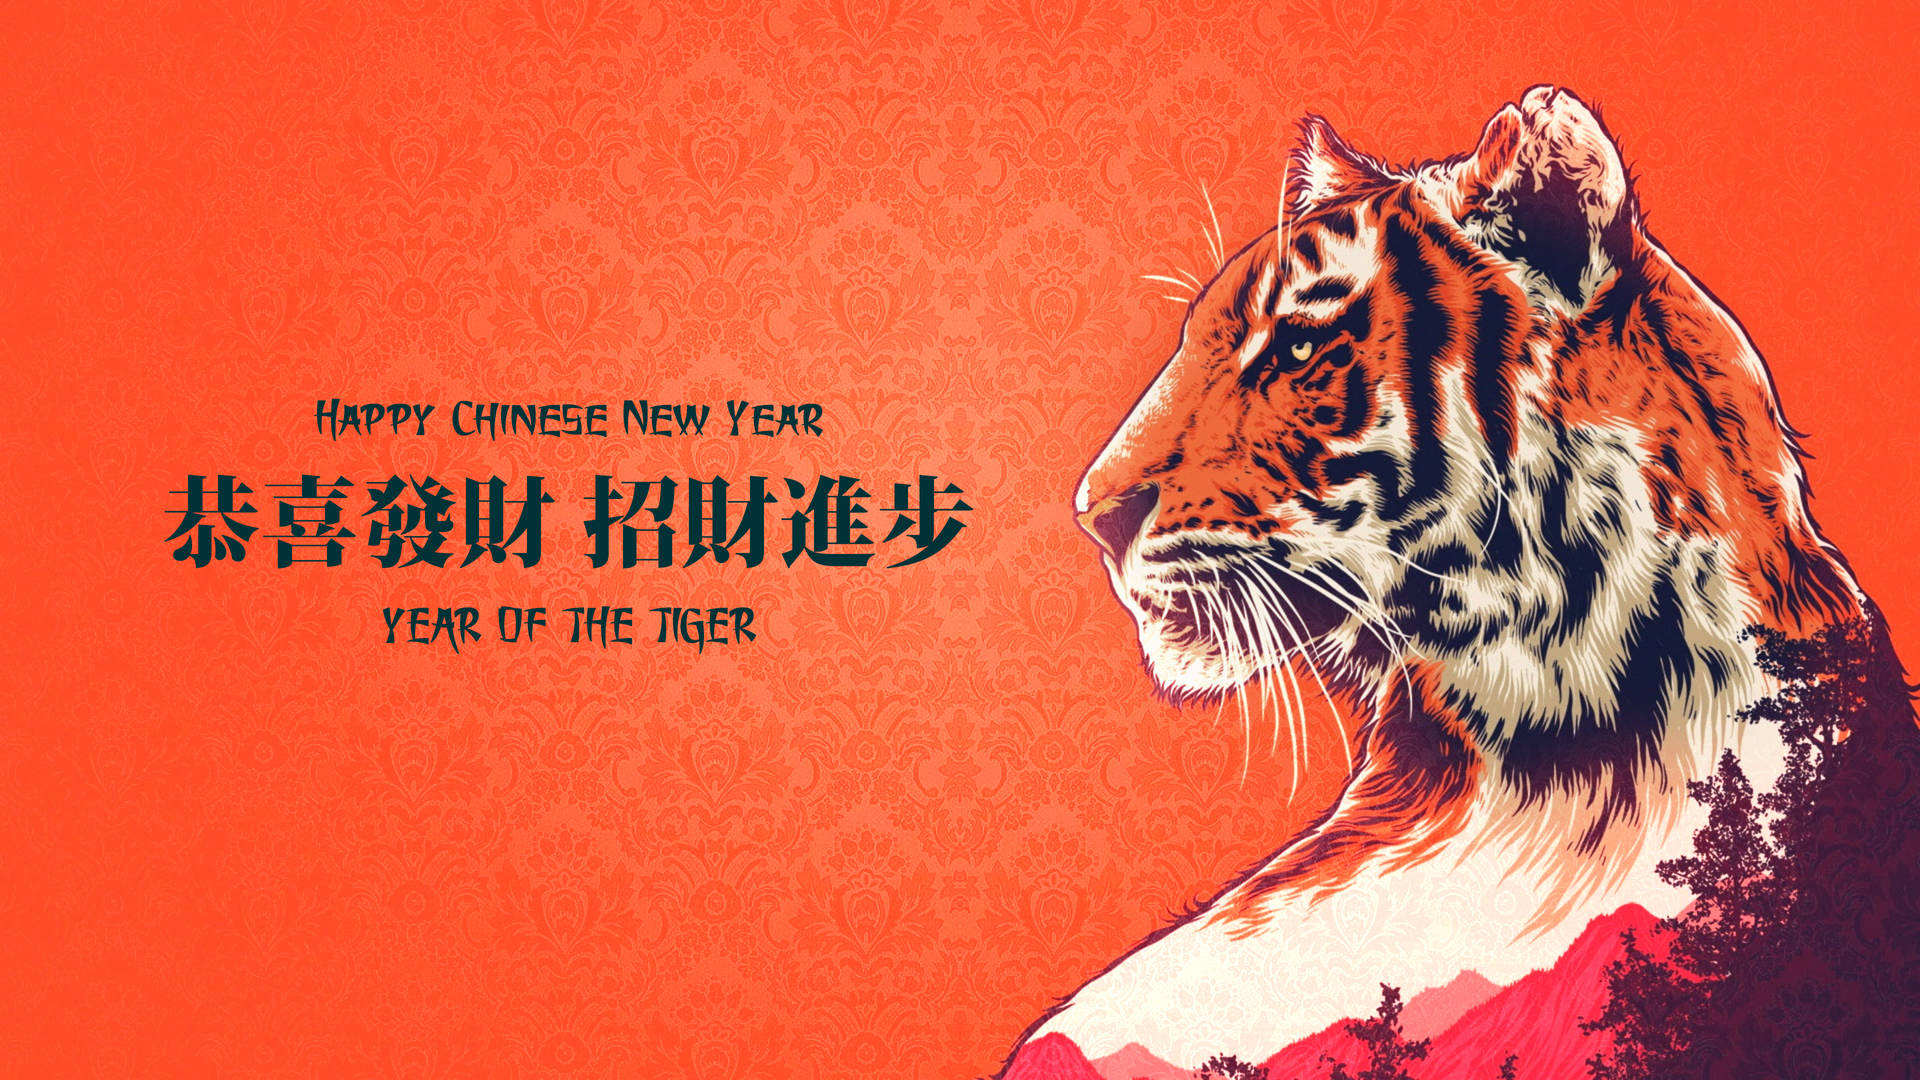 Chinese New Year Wallpaper Images